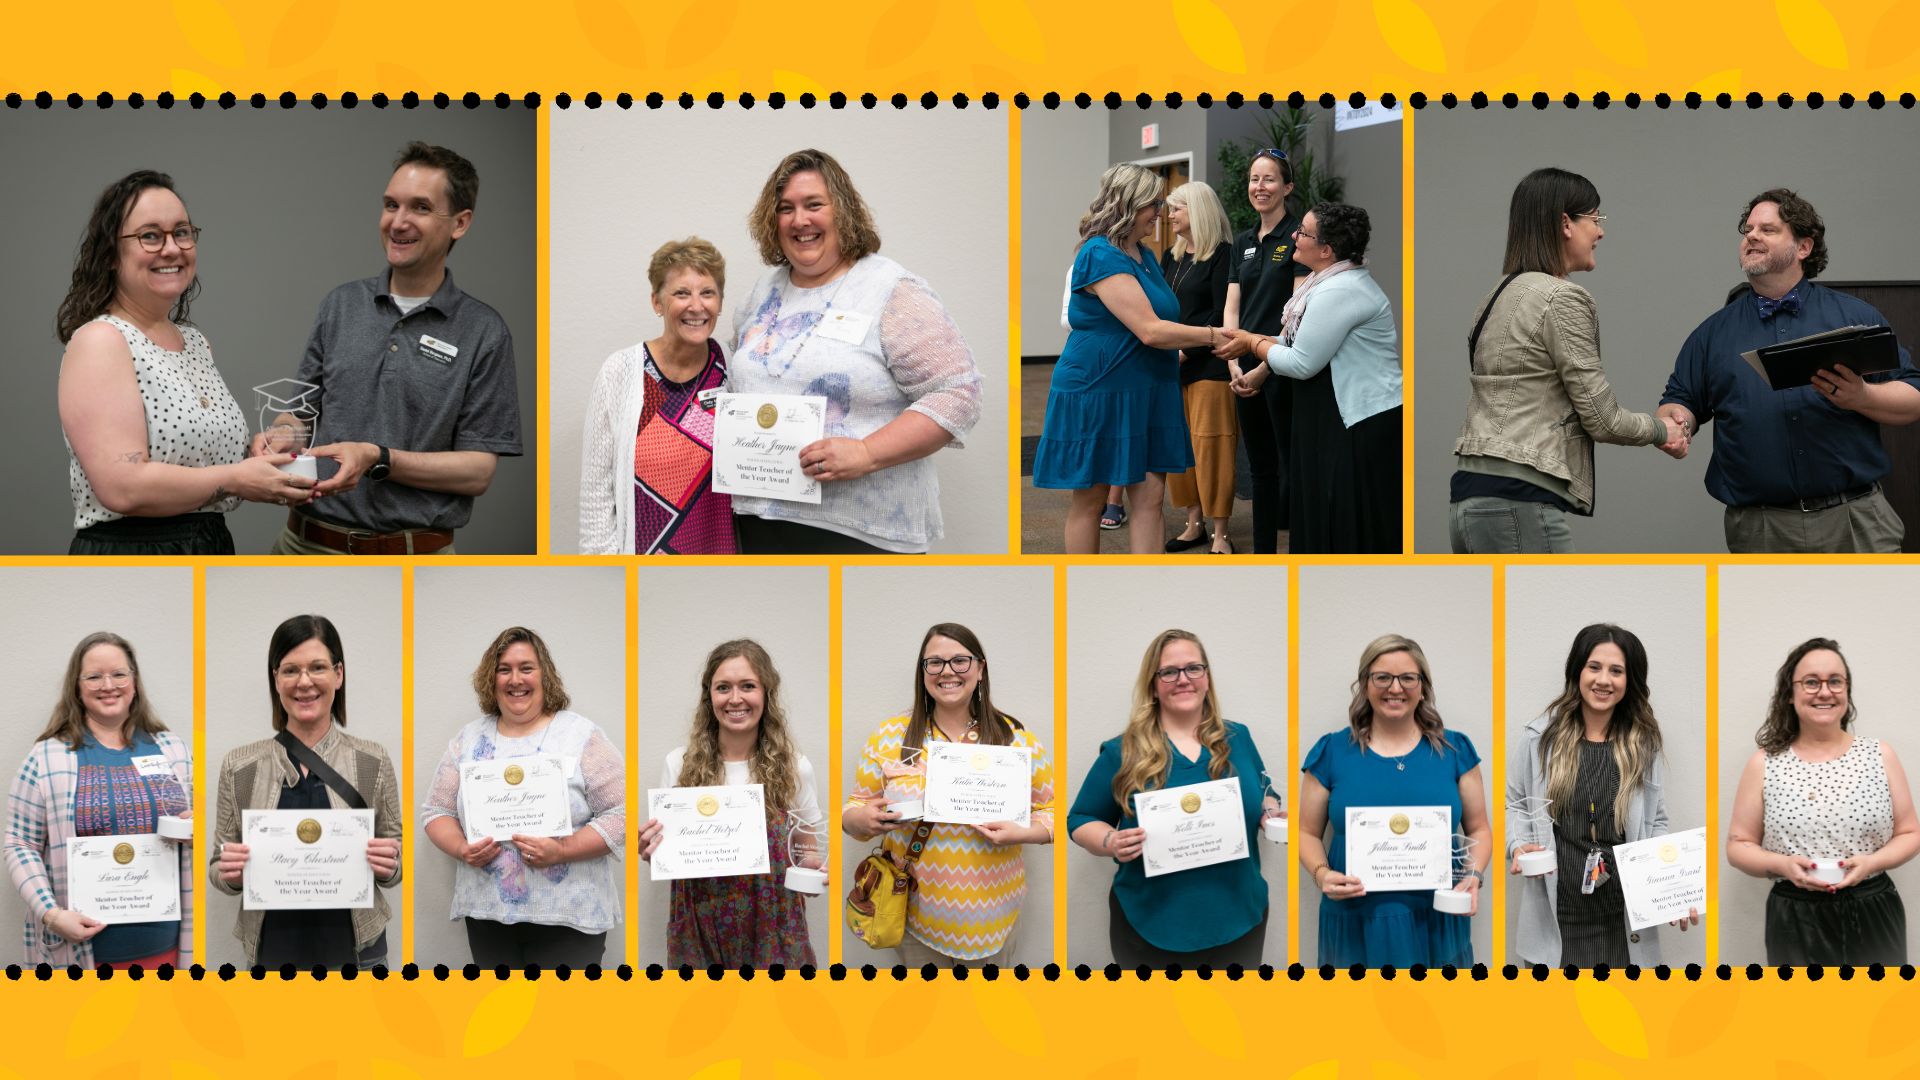 Collage of mentor teacher awards recognition